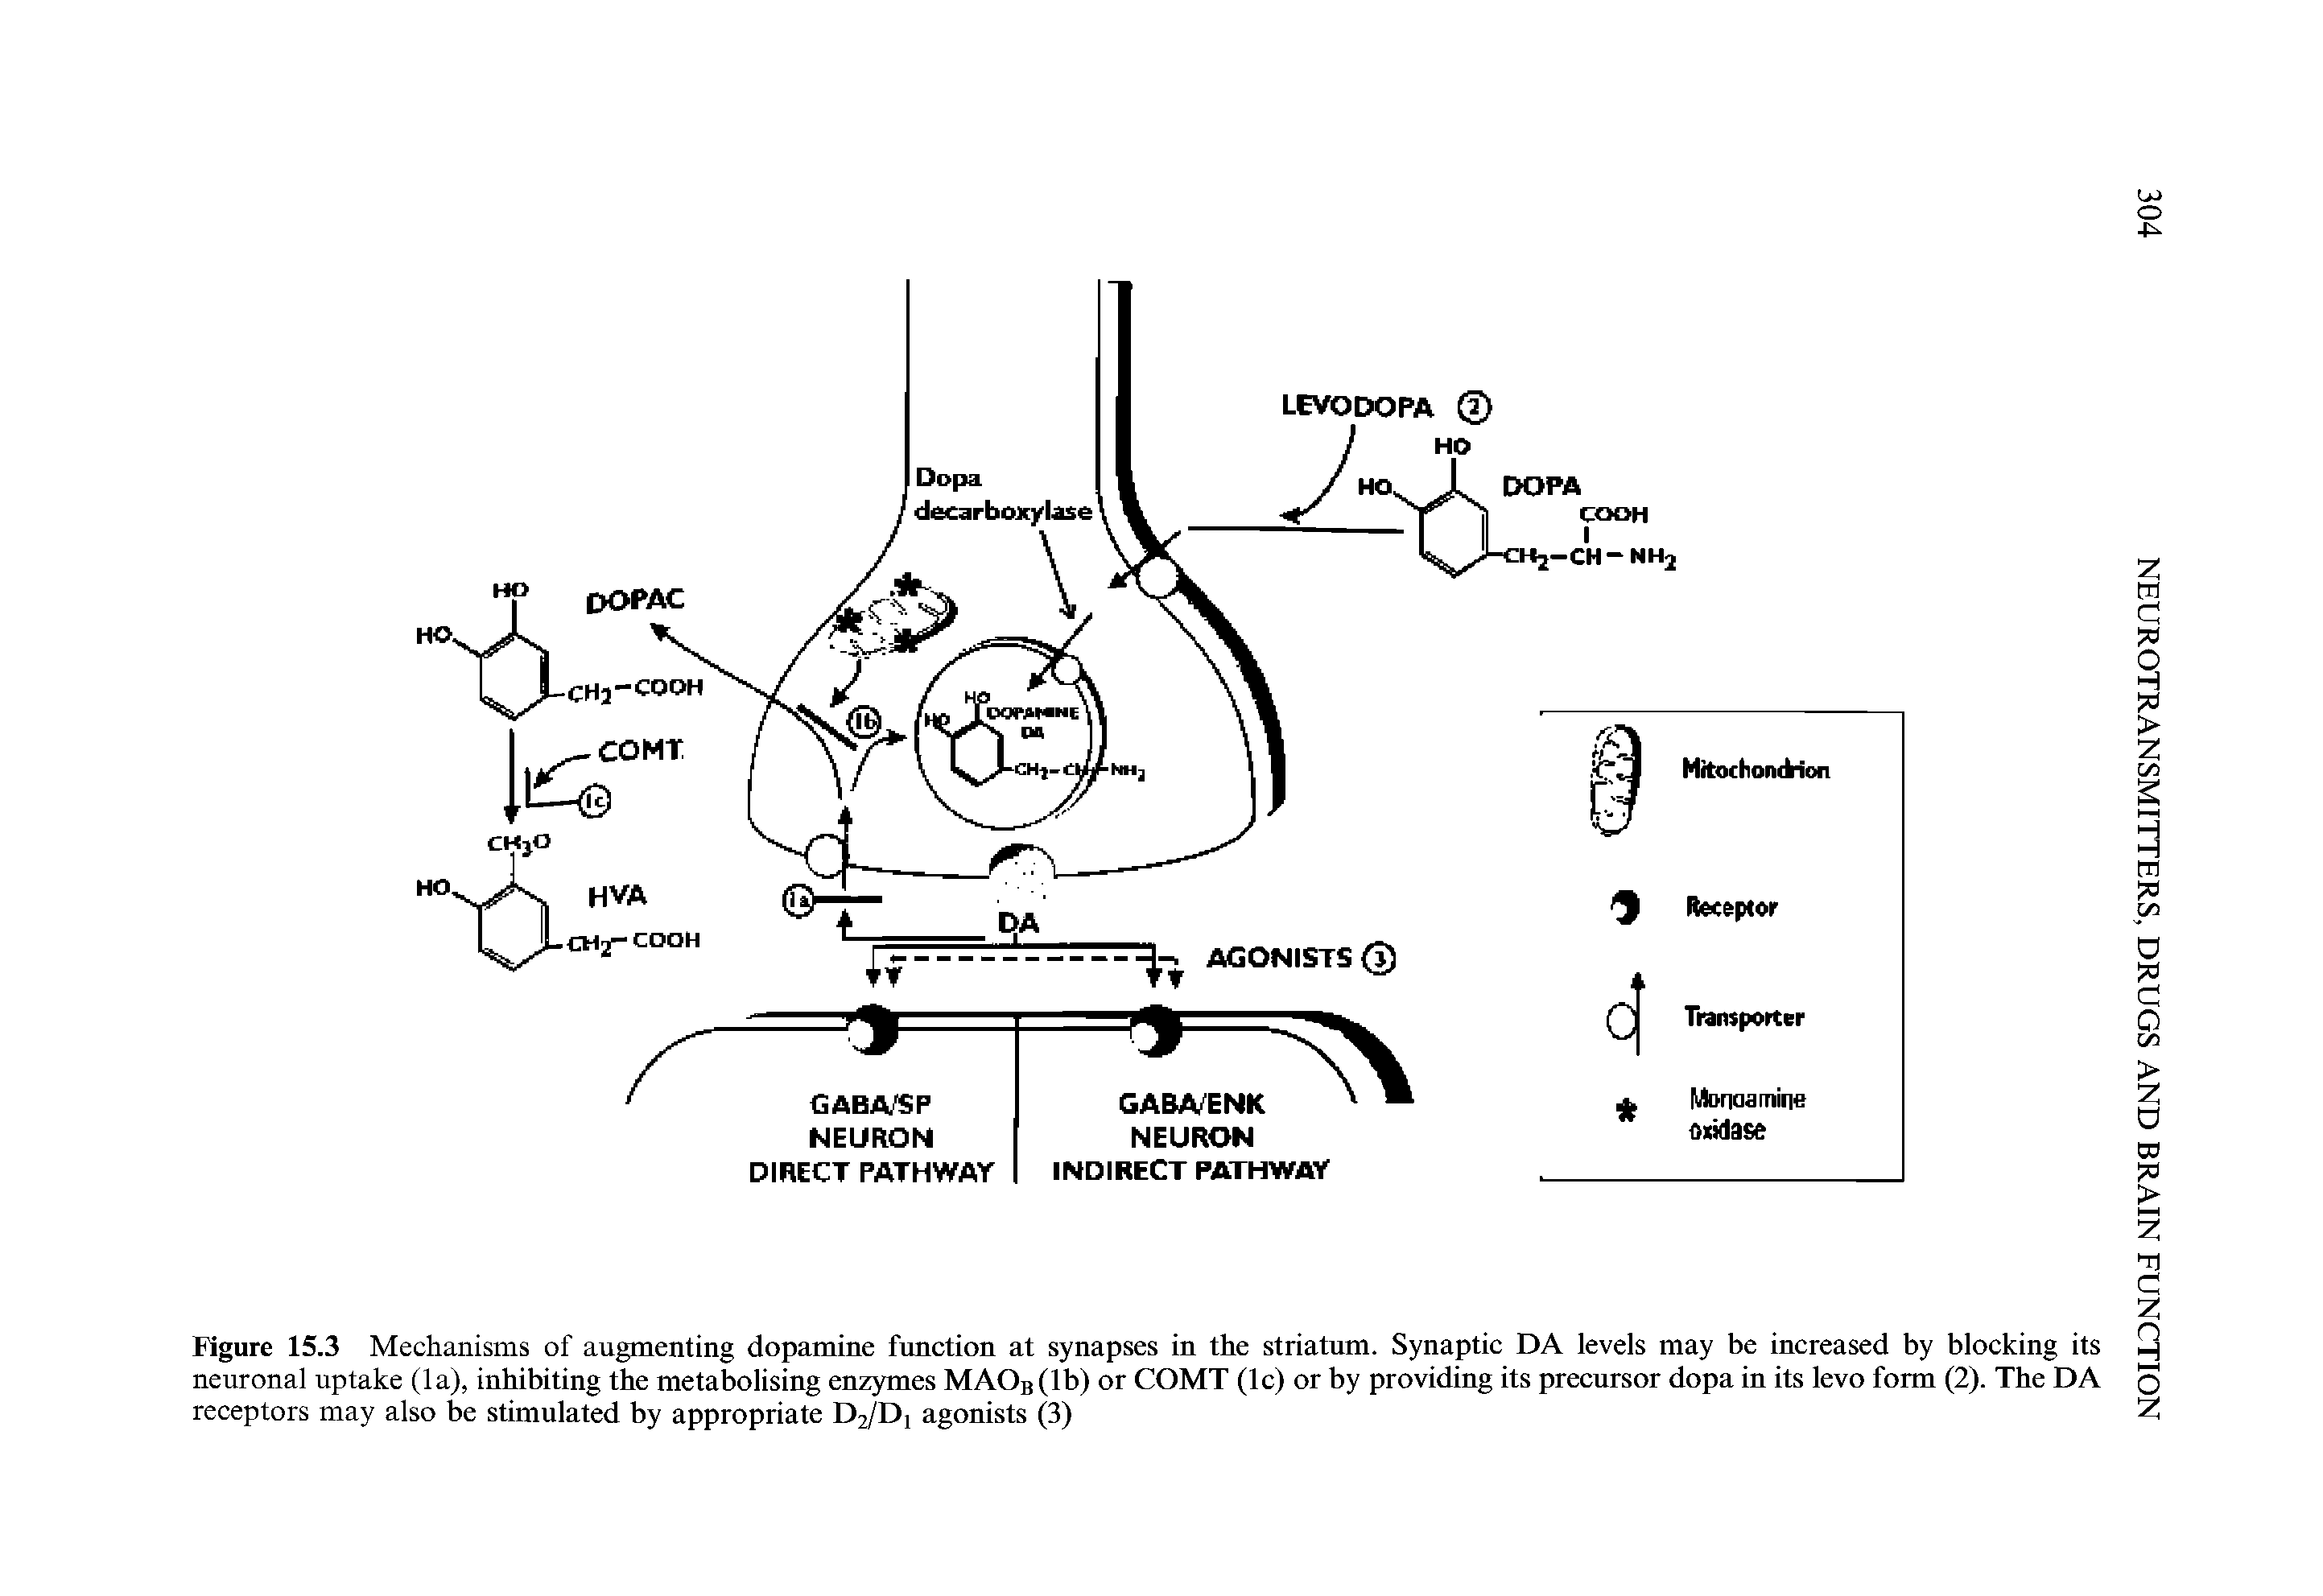 Figure 15.3 Mechanisms of augmenting dopamine function at synapses in the striatum. Synaptic DA levels may be increased by blocking its neuronal uptake (la), inhibiting the metabolising enzymes MAOsClb) or COMT (Ic) or by providing its precursor dopa in its levo form (2). The DA receptors may also be stimulated by appropriate D2/D1 agonists (3)...